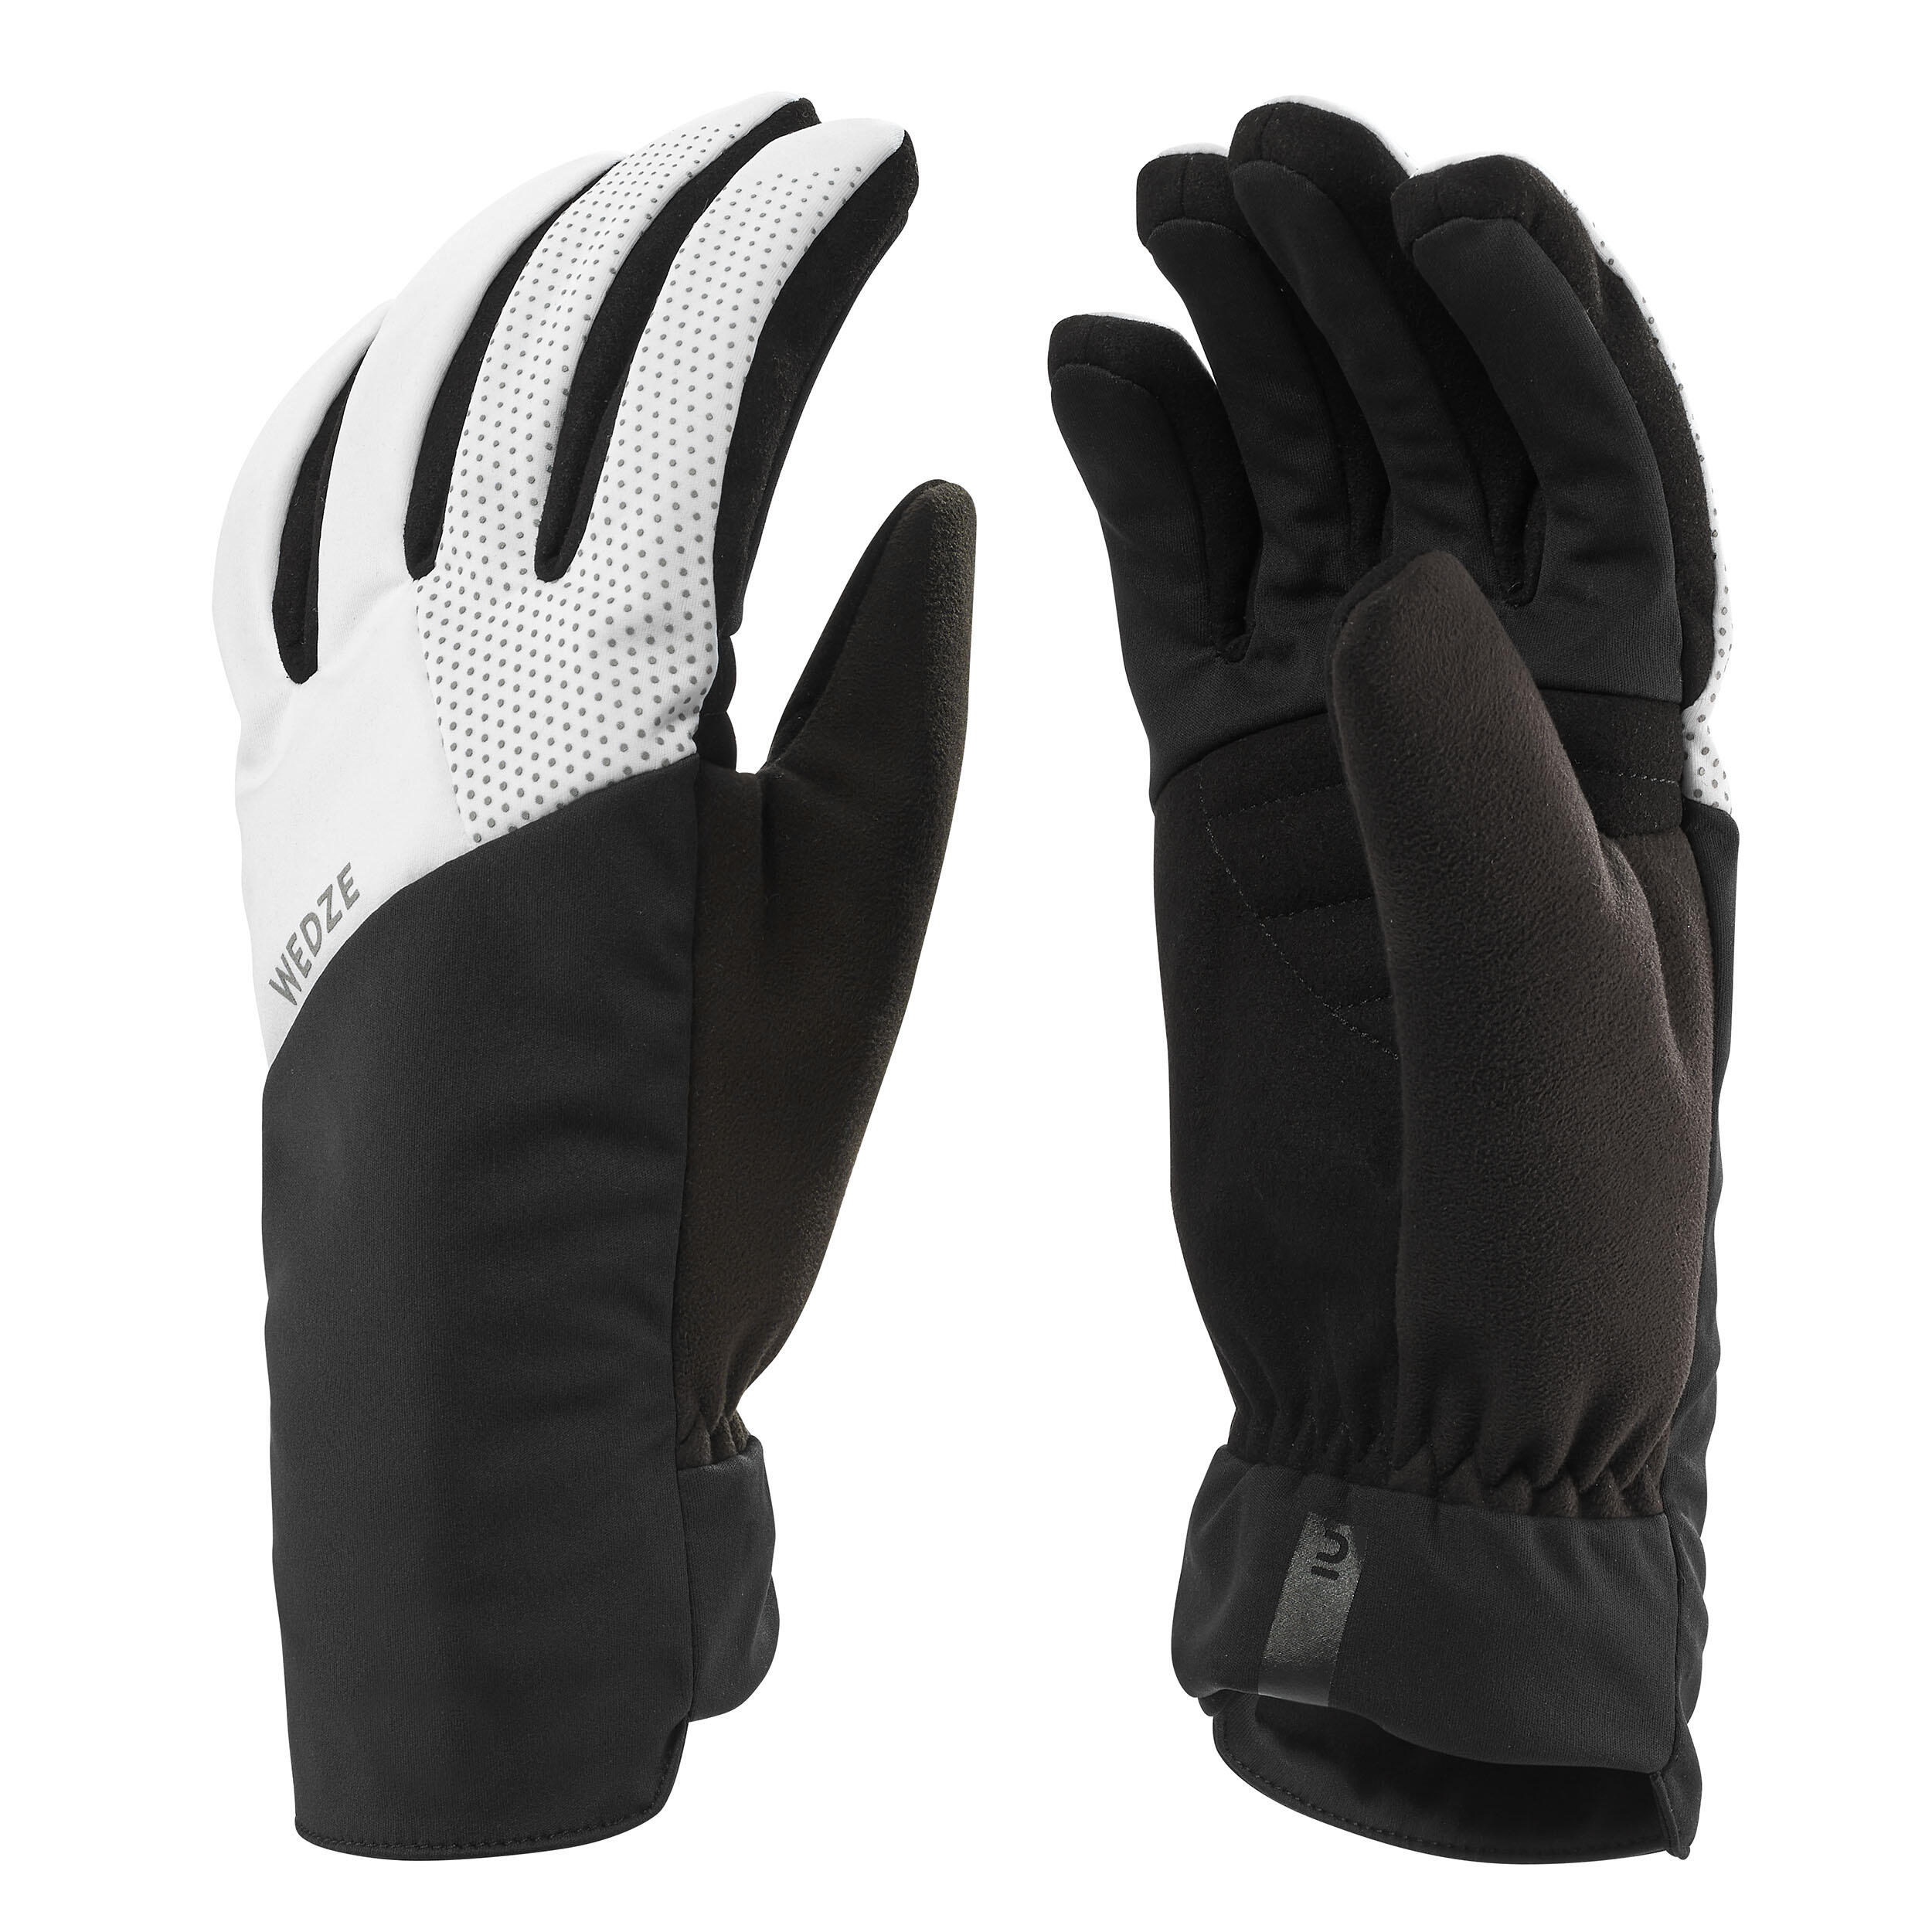 ADULT WARM CROSS-COUNTRY SKI GLOVES 100 1/4